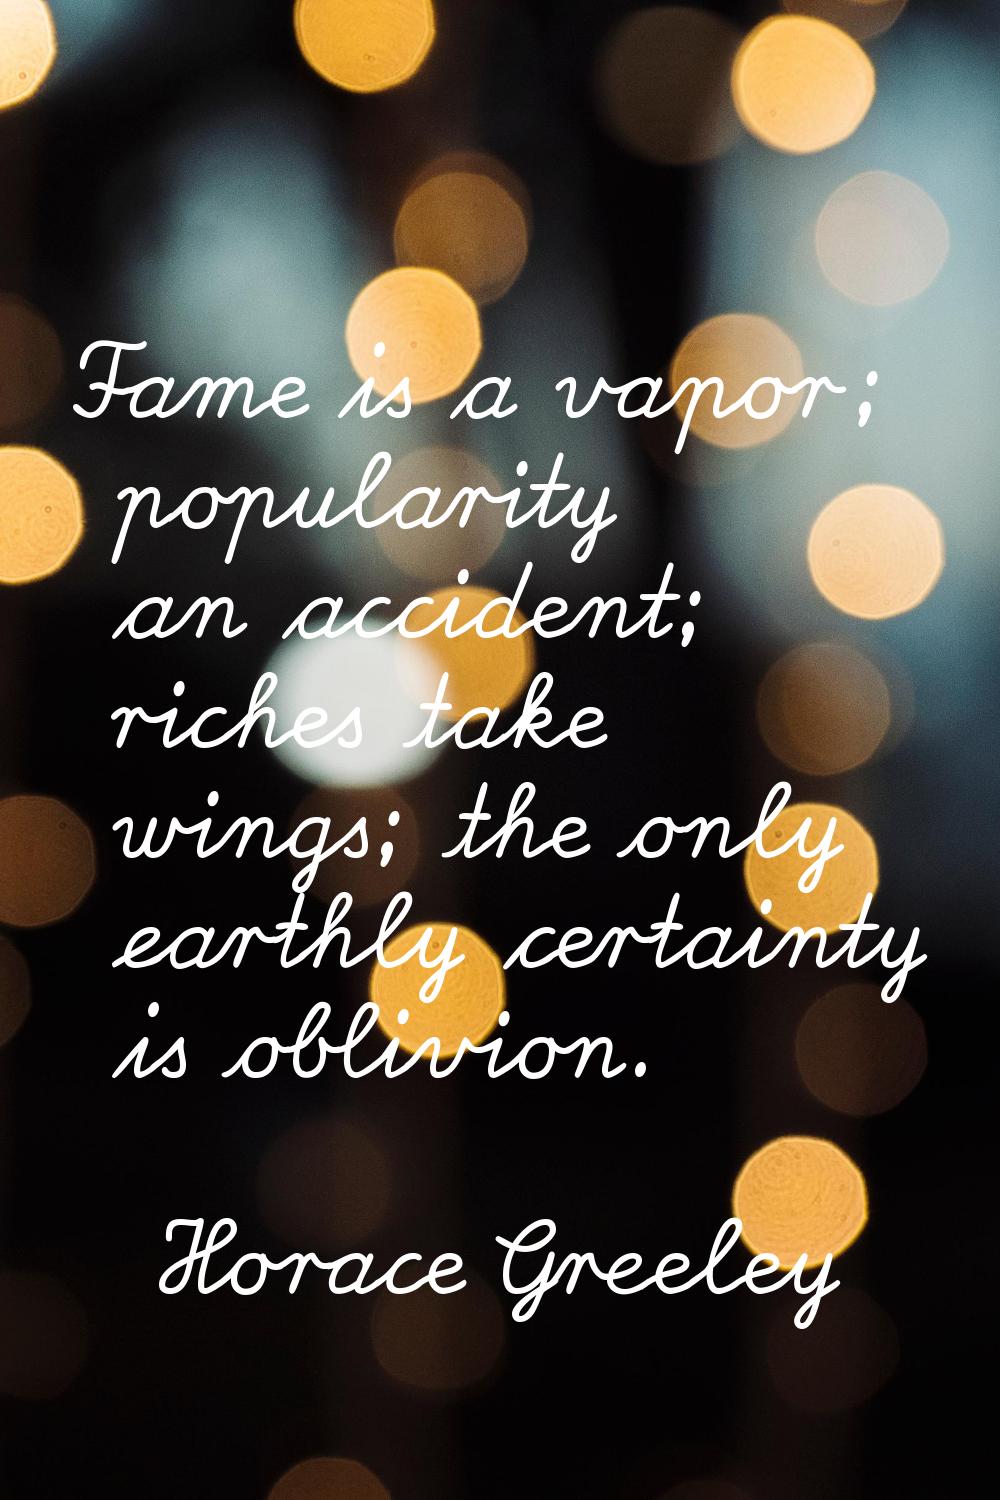 Fame is a vapor; popularity an accident; riches take wings; the only earthly certainty is oblivion.